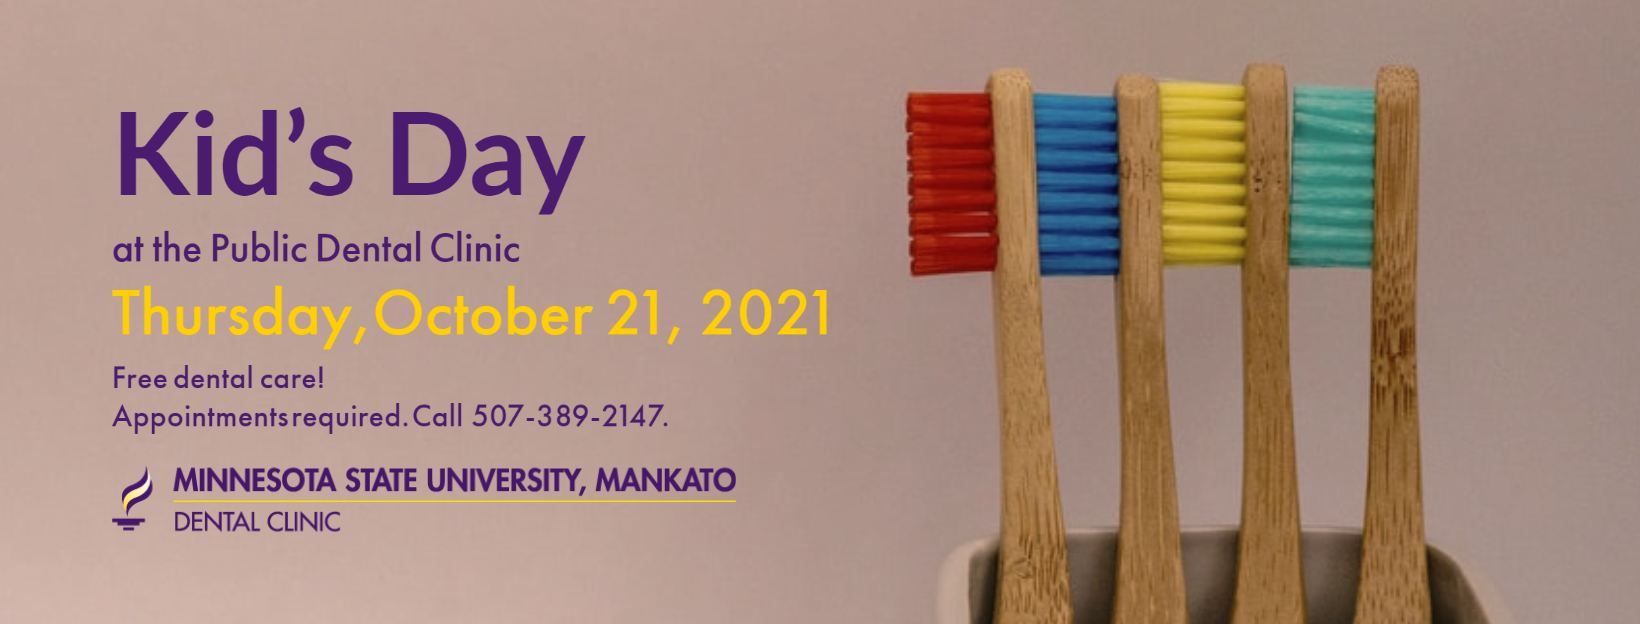 A Minnesota State University's Kids Day at the public dental clinic poster